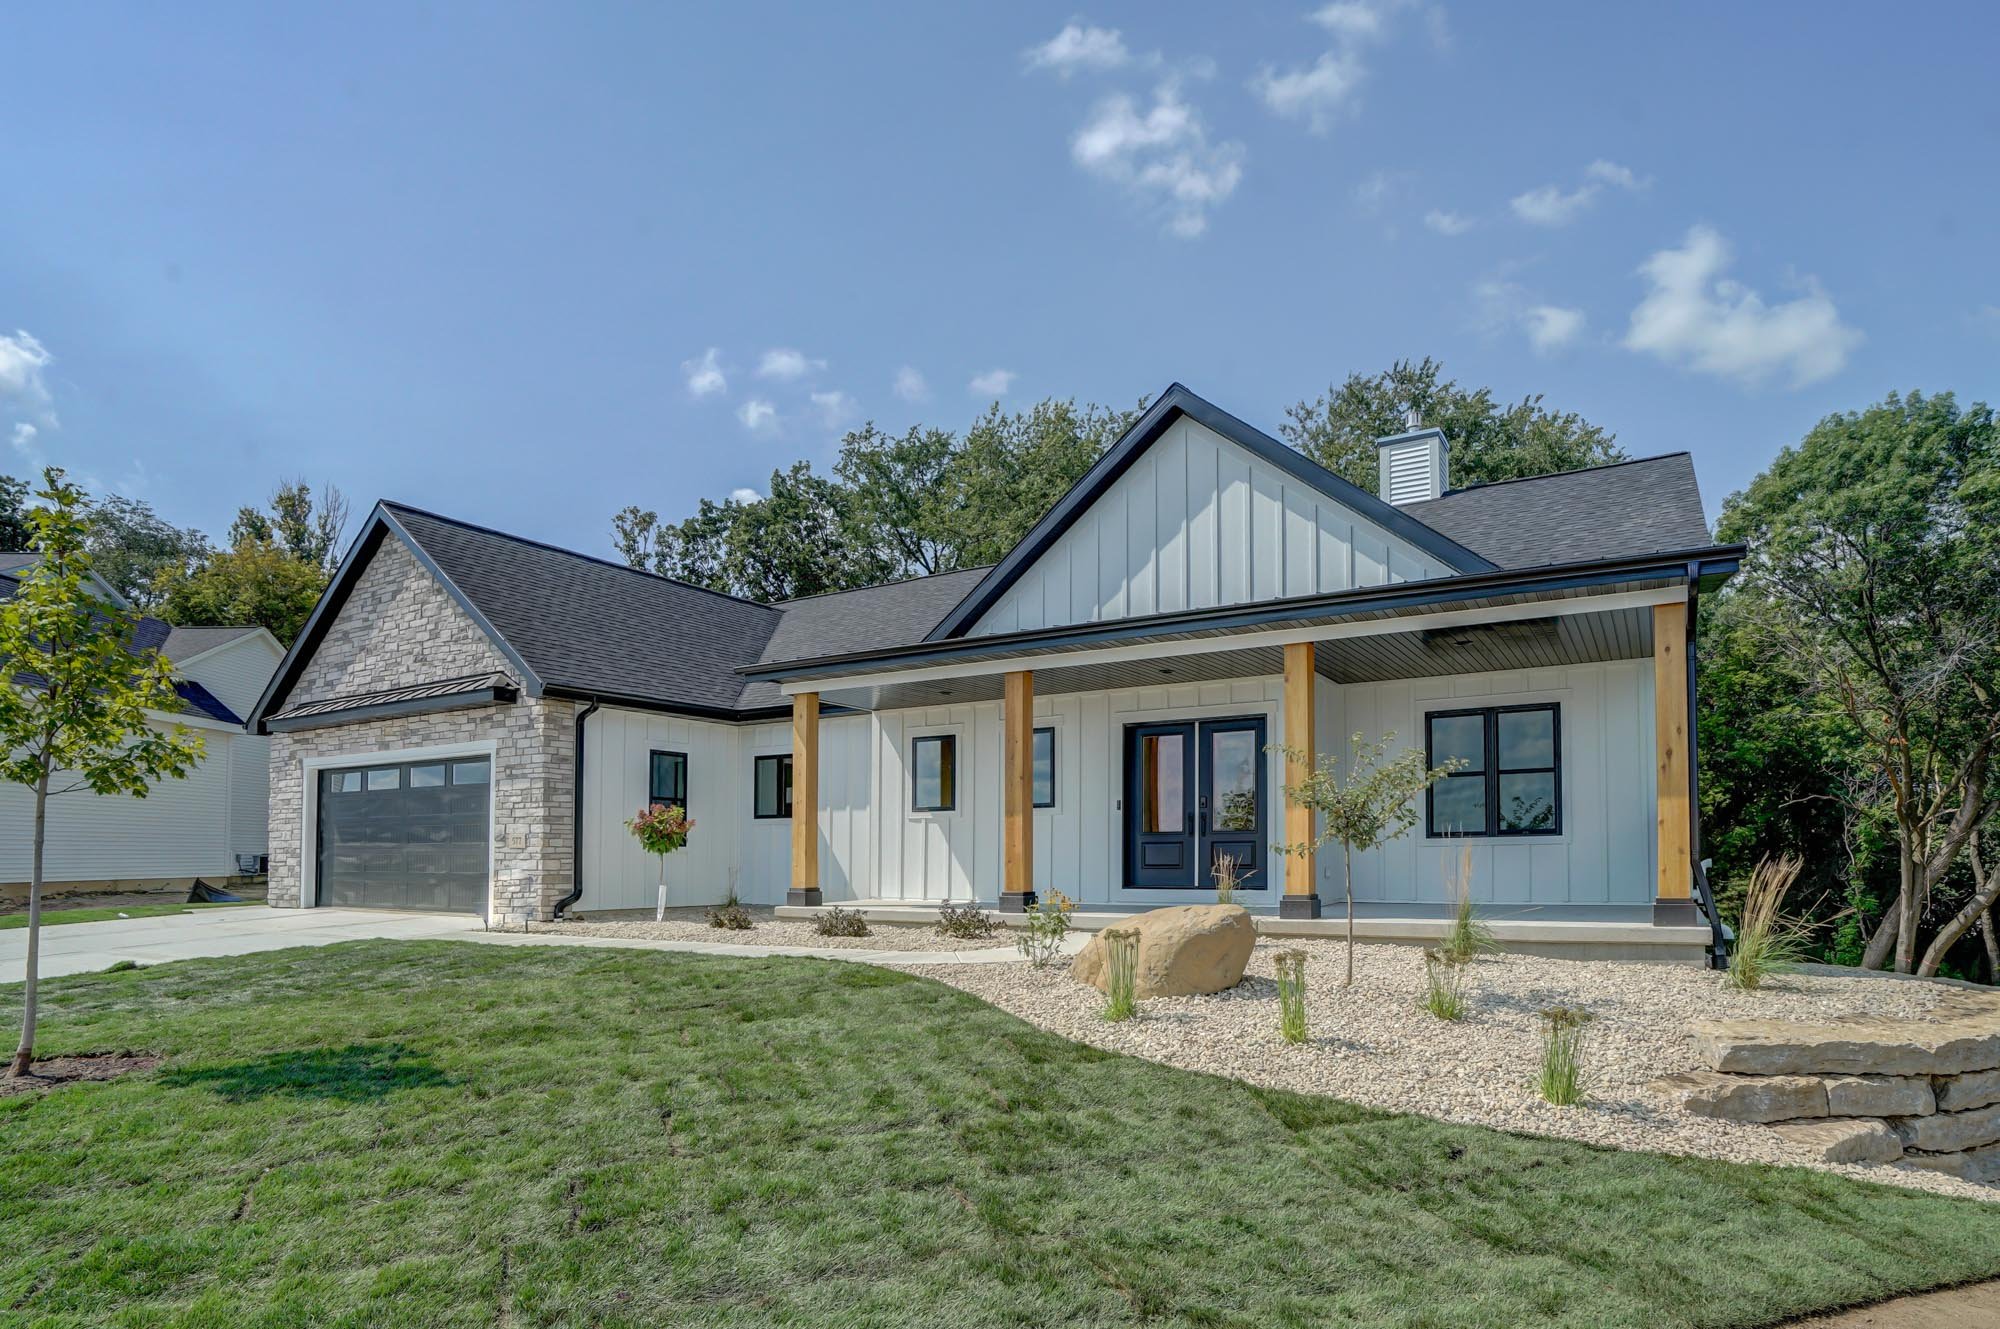 A modern farmhouse designed and built by Alterra Design Homes.